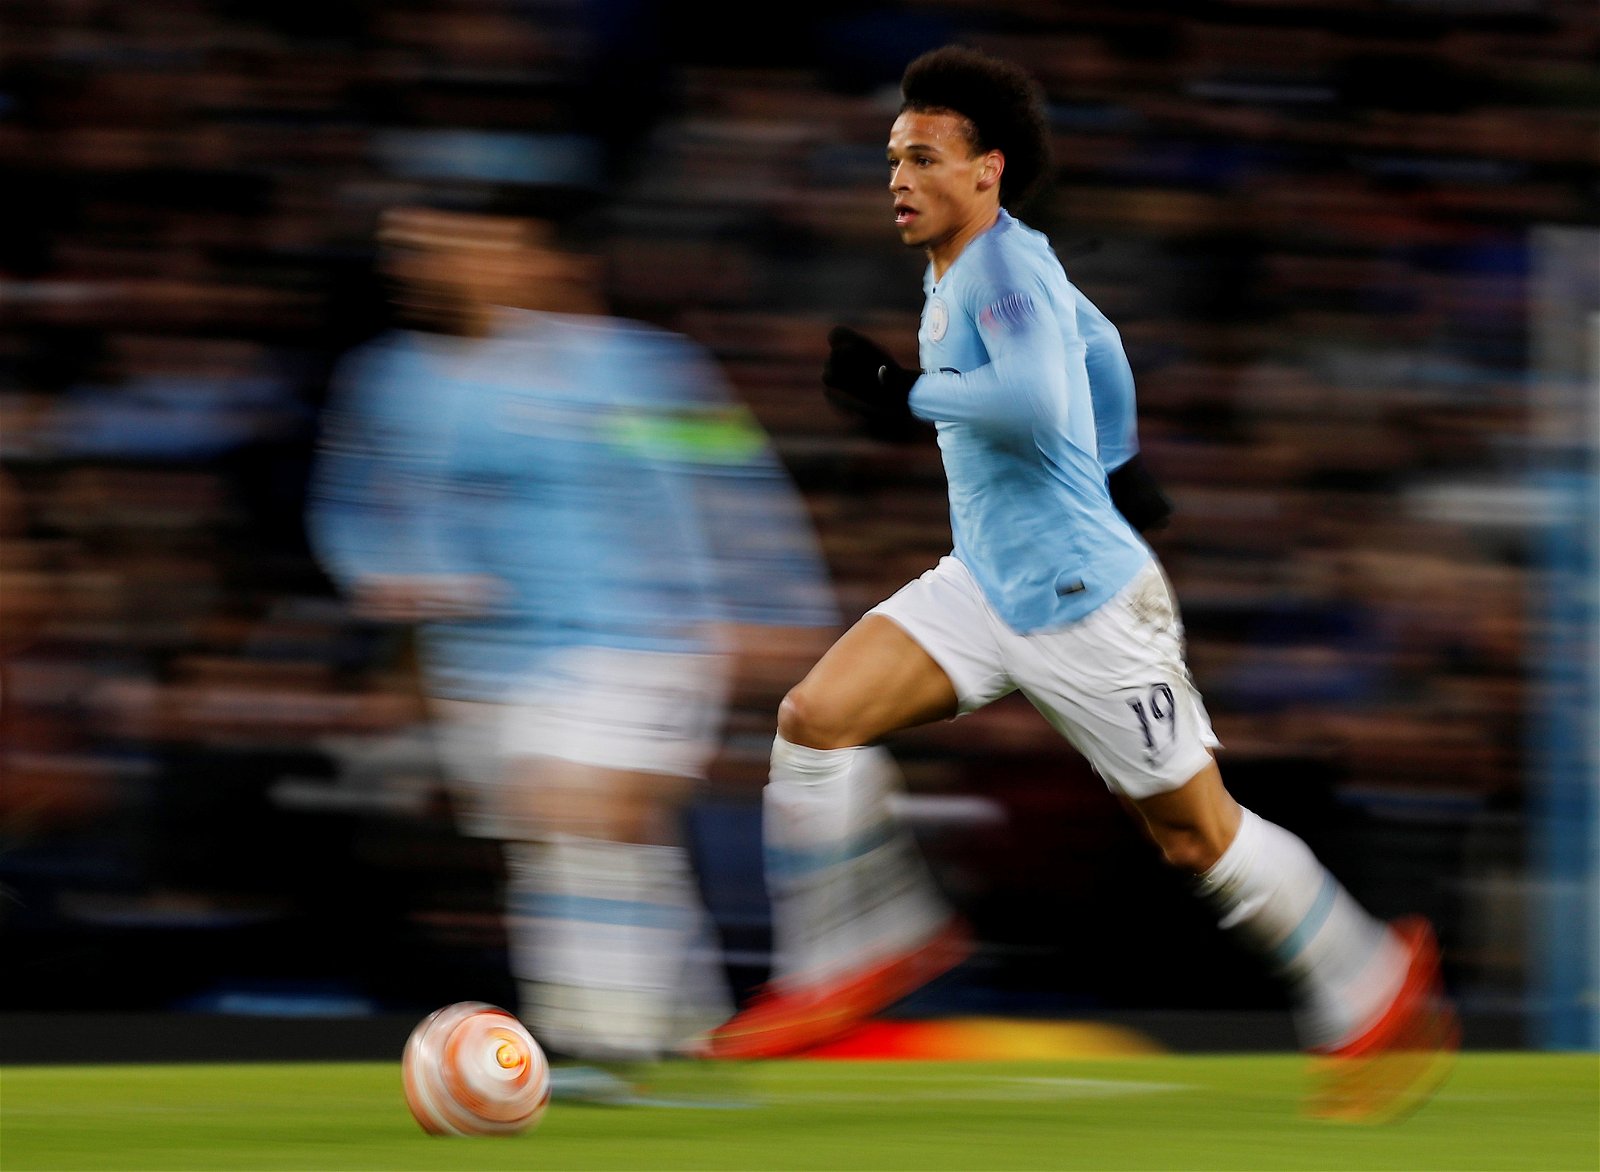 Top 5 players with fastest sprint in 2018/19 Champions League 11